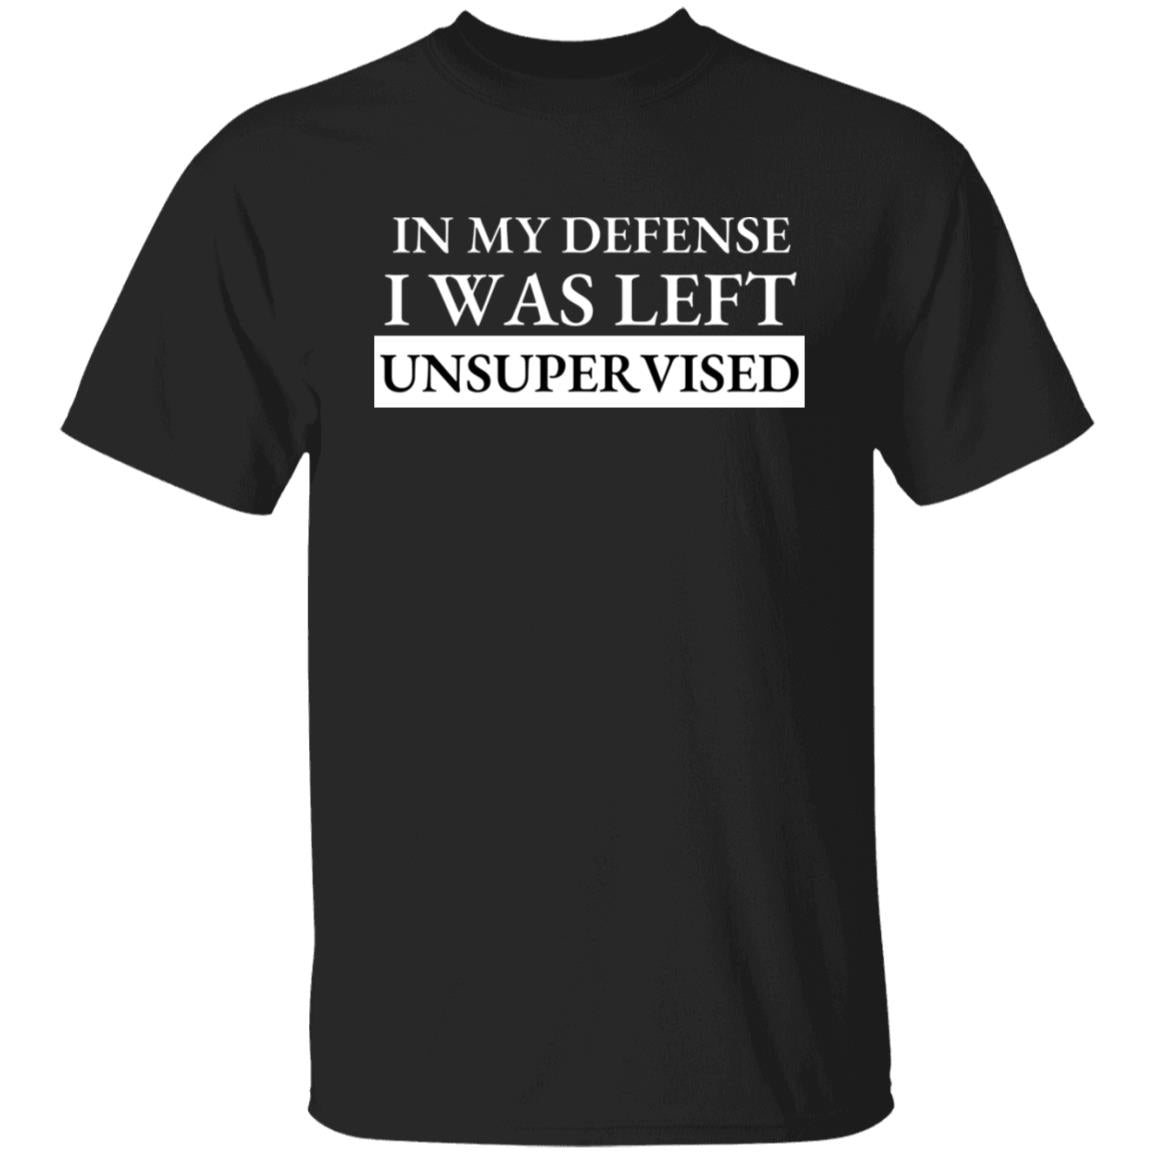 In my Defense I Was Left Unsupervised T-Shirt